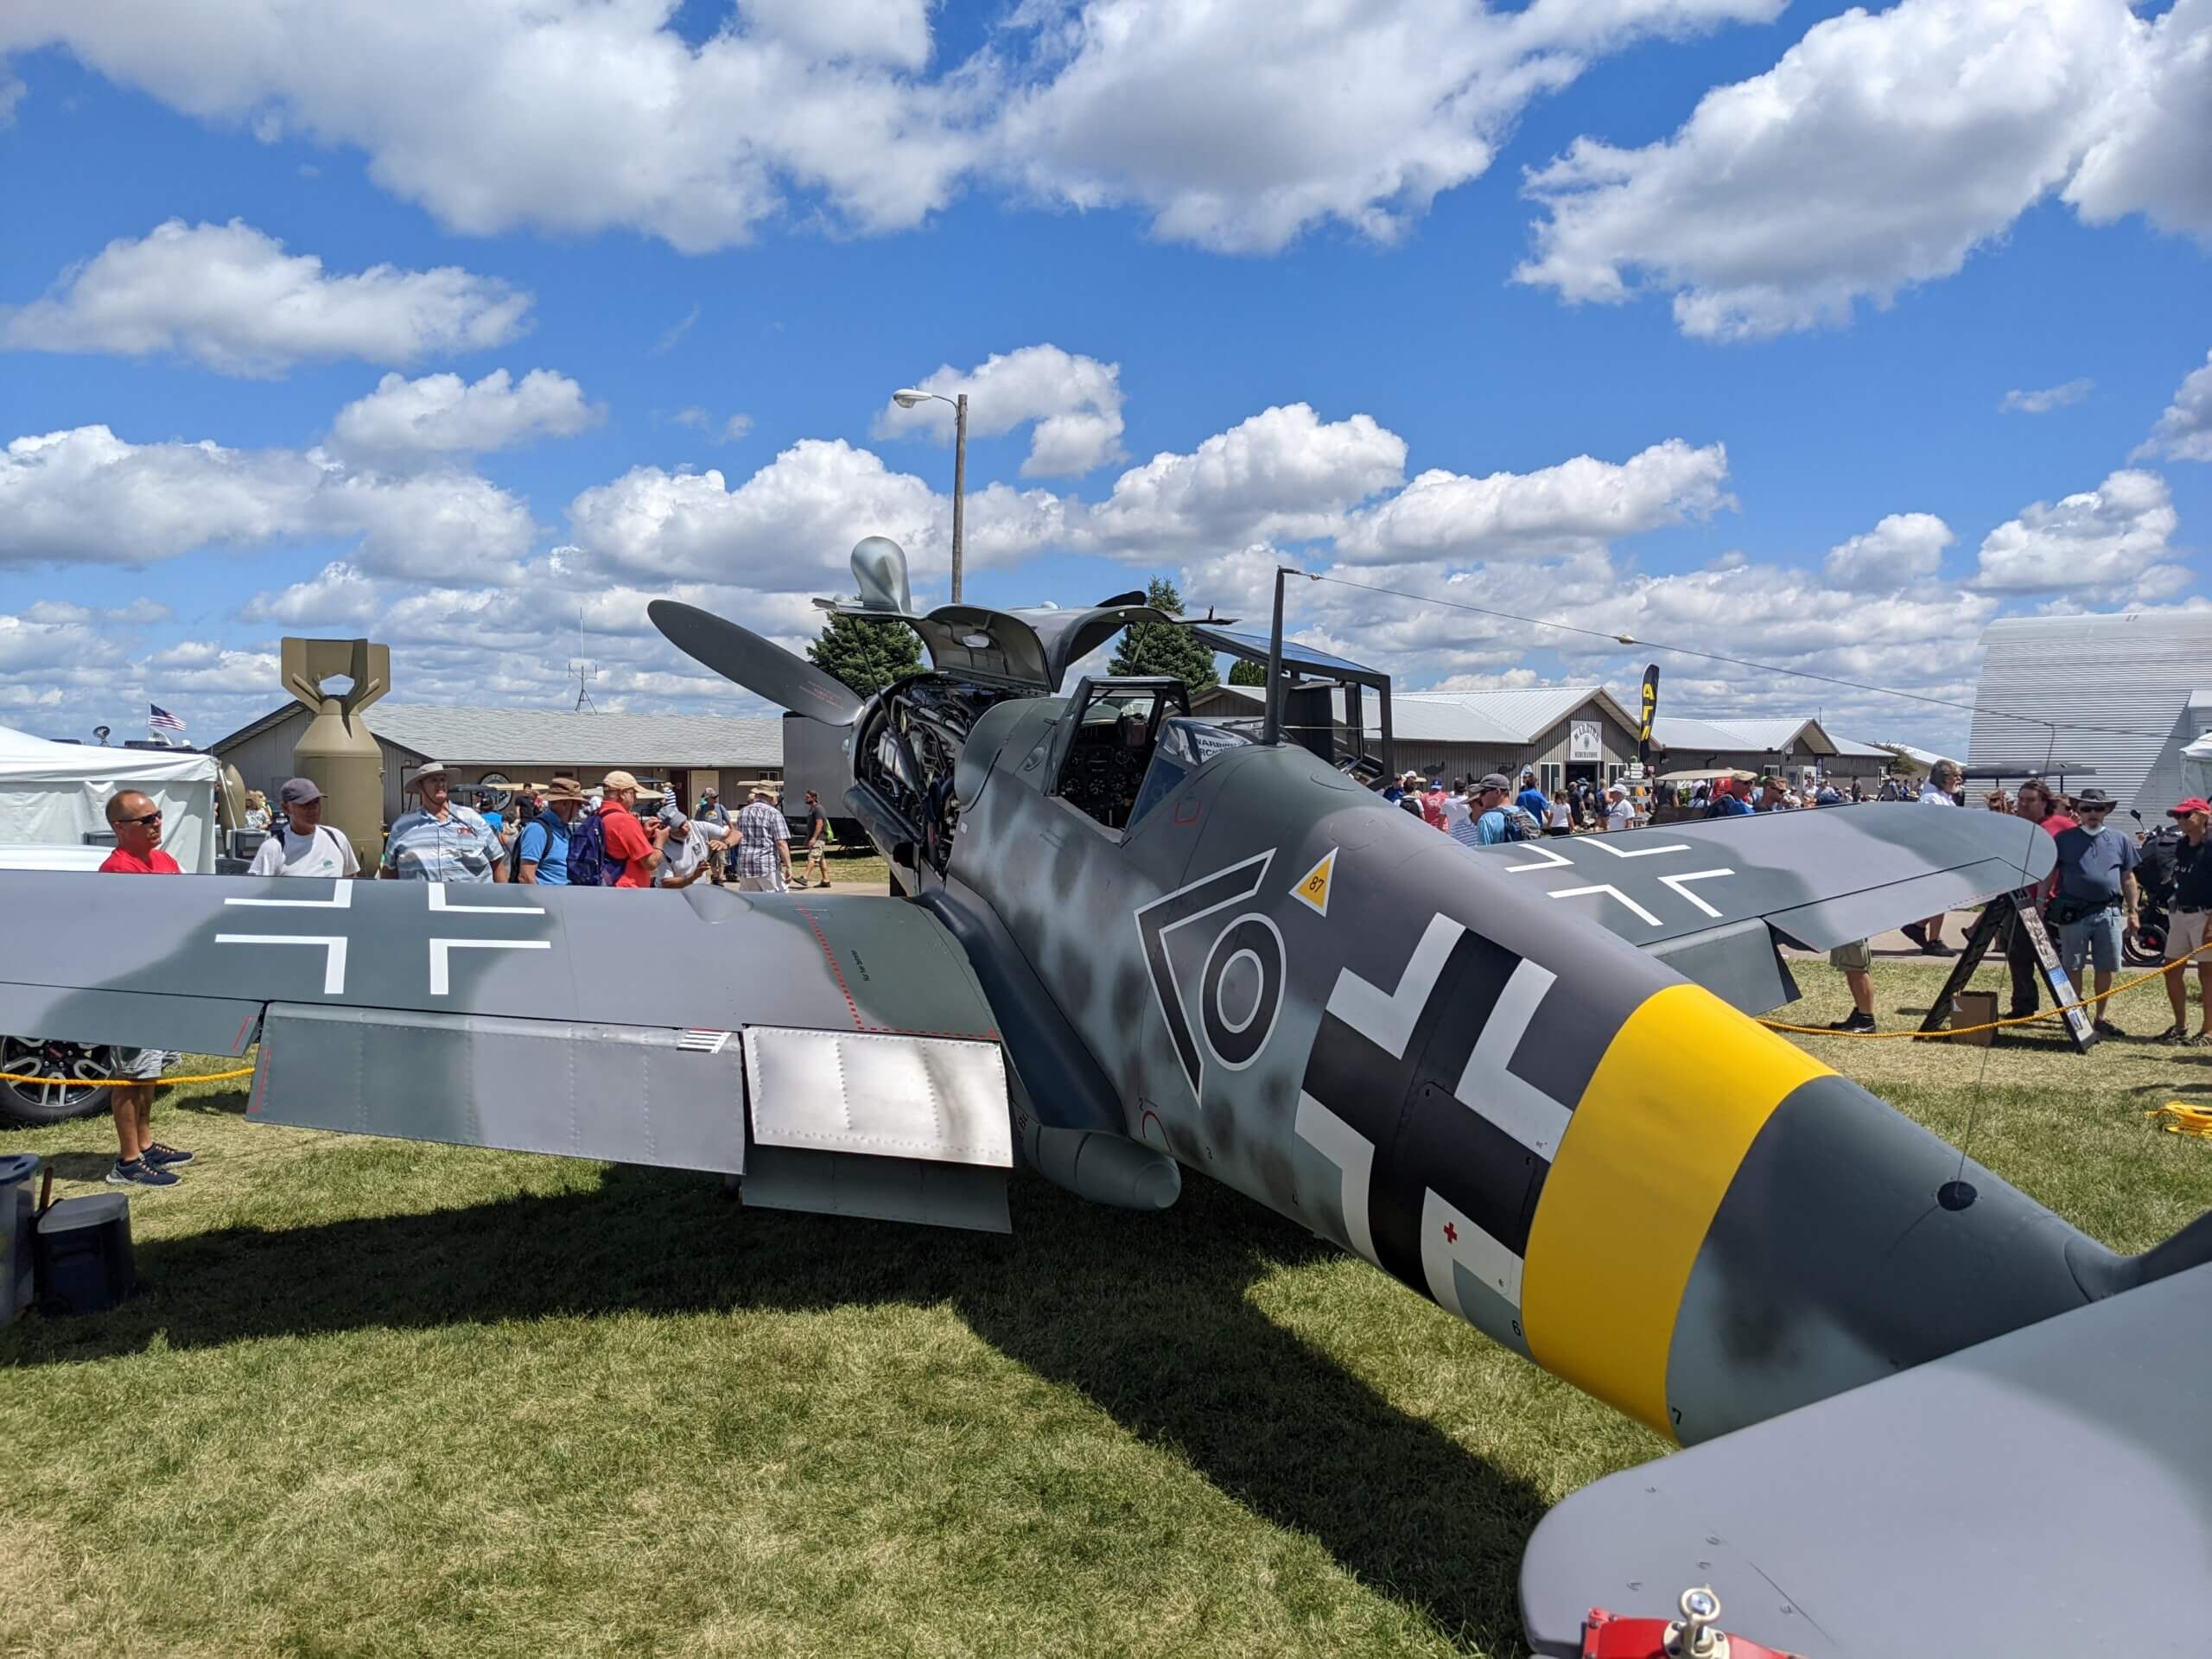 One of the last remaining airworthy Messerschmitt Bf 109G fighters on display at Oshkosh